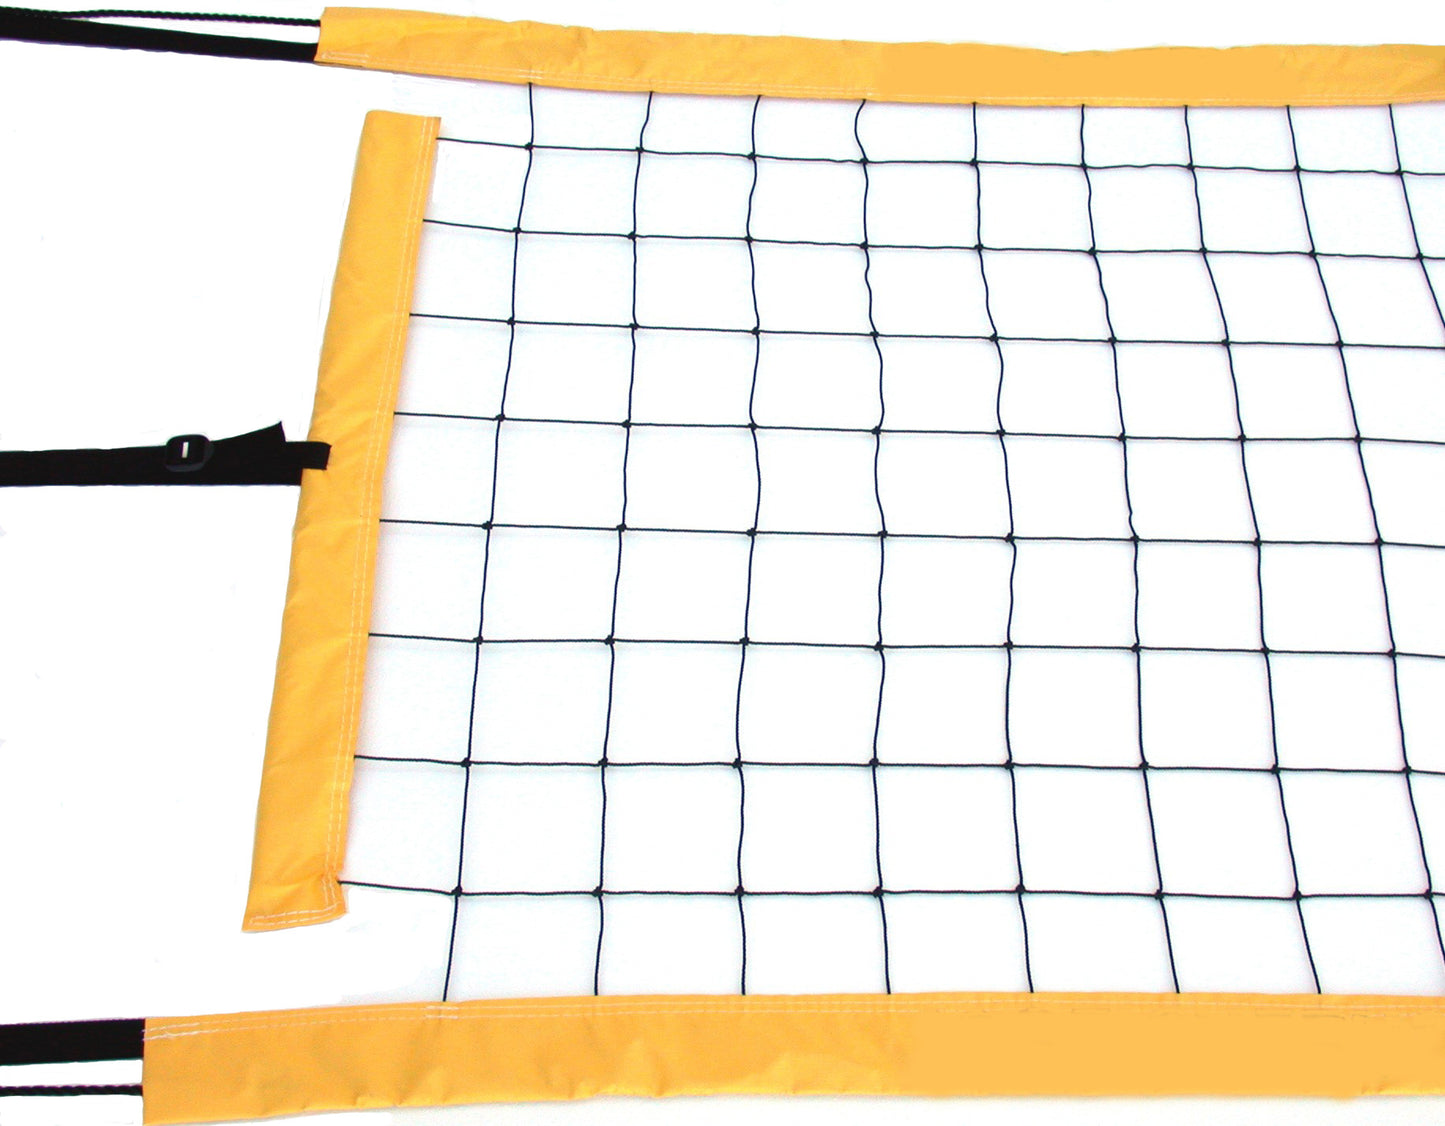 PNRY-Power Volleyball Suspension Net Twisted Rope Yellow Vinyl